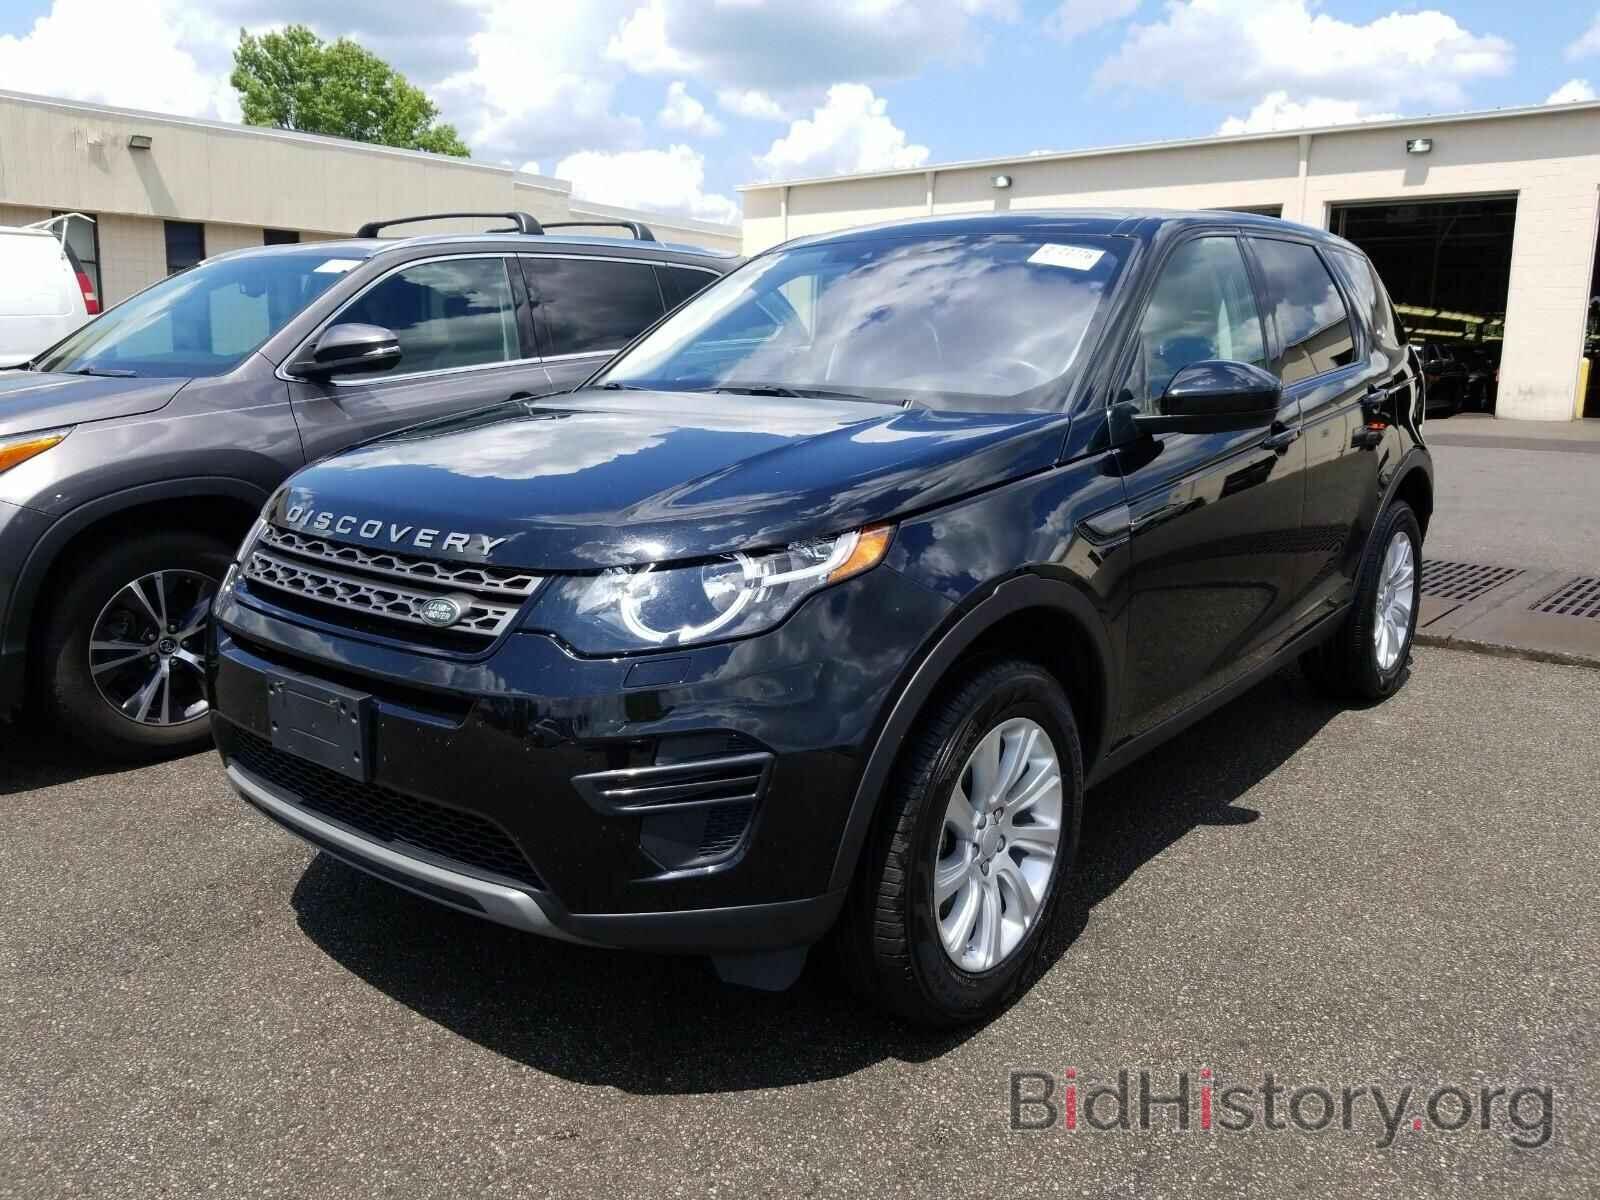 Фотография SALCP2RX8JH752528 - Land Rover Discovery Sport 2018